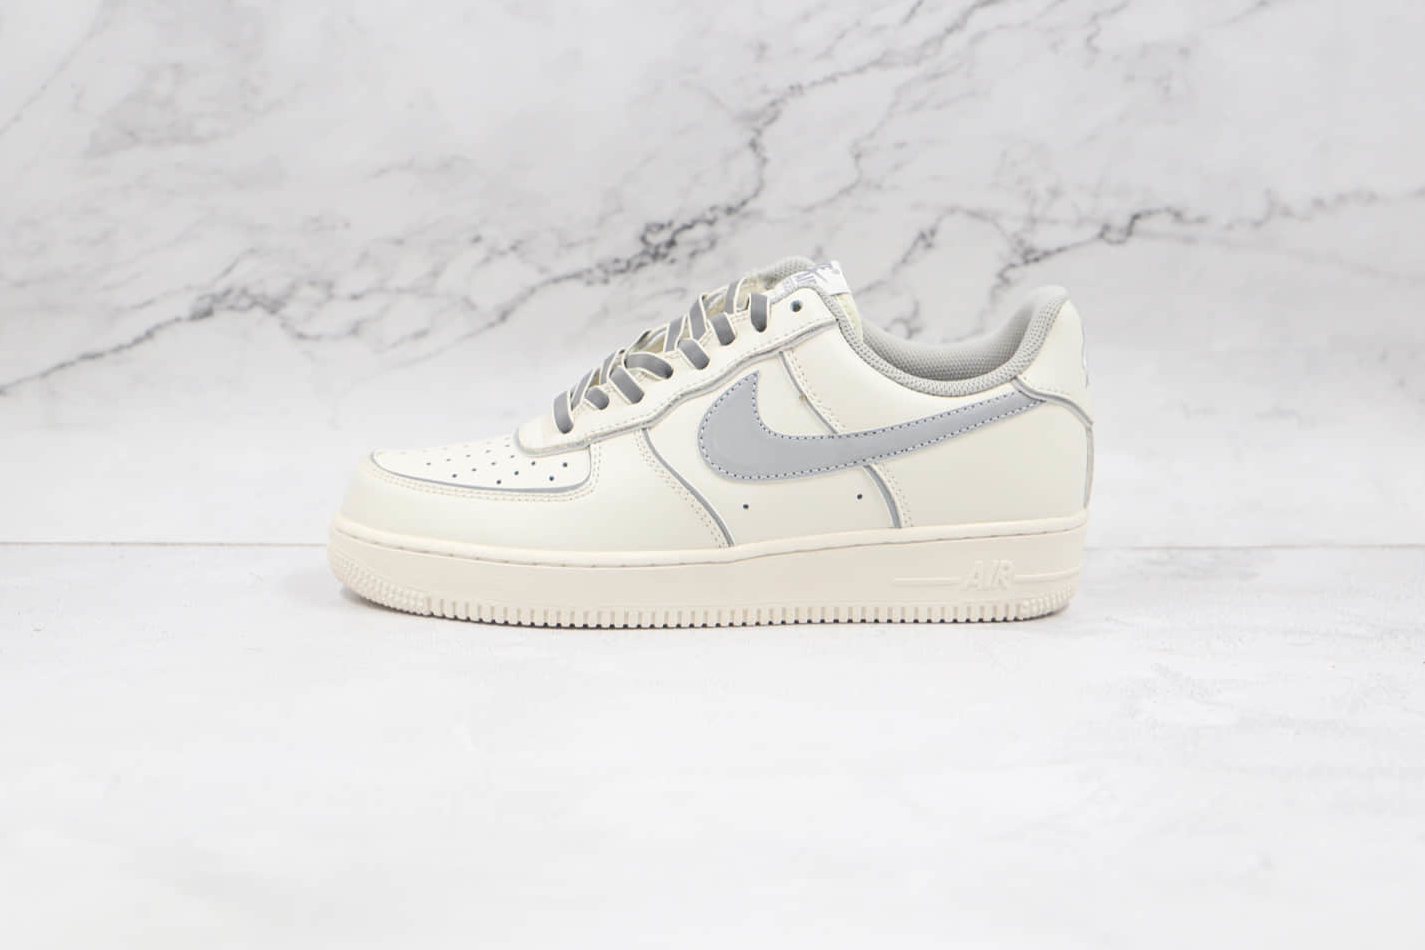 Nike Air Force 1 Low White Metallic Silver Shoes BQ8228-366 - Stylish & Sleek Footwear for Any Occasion